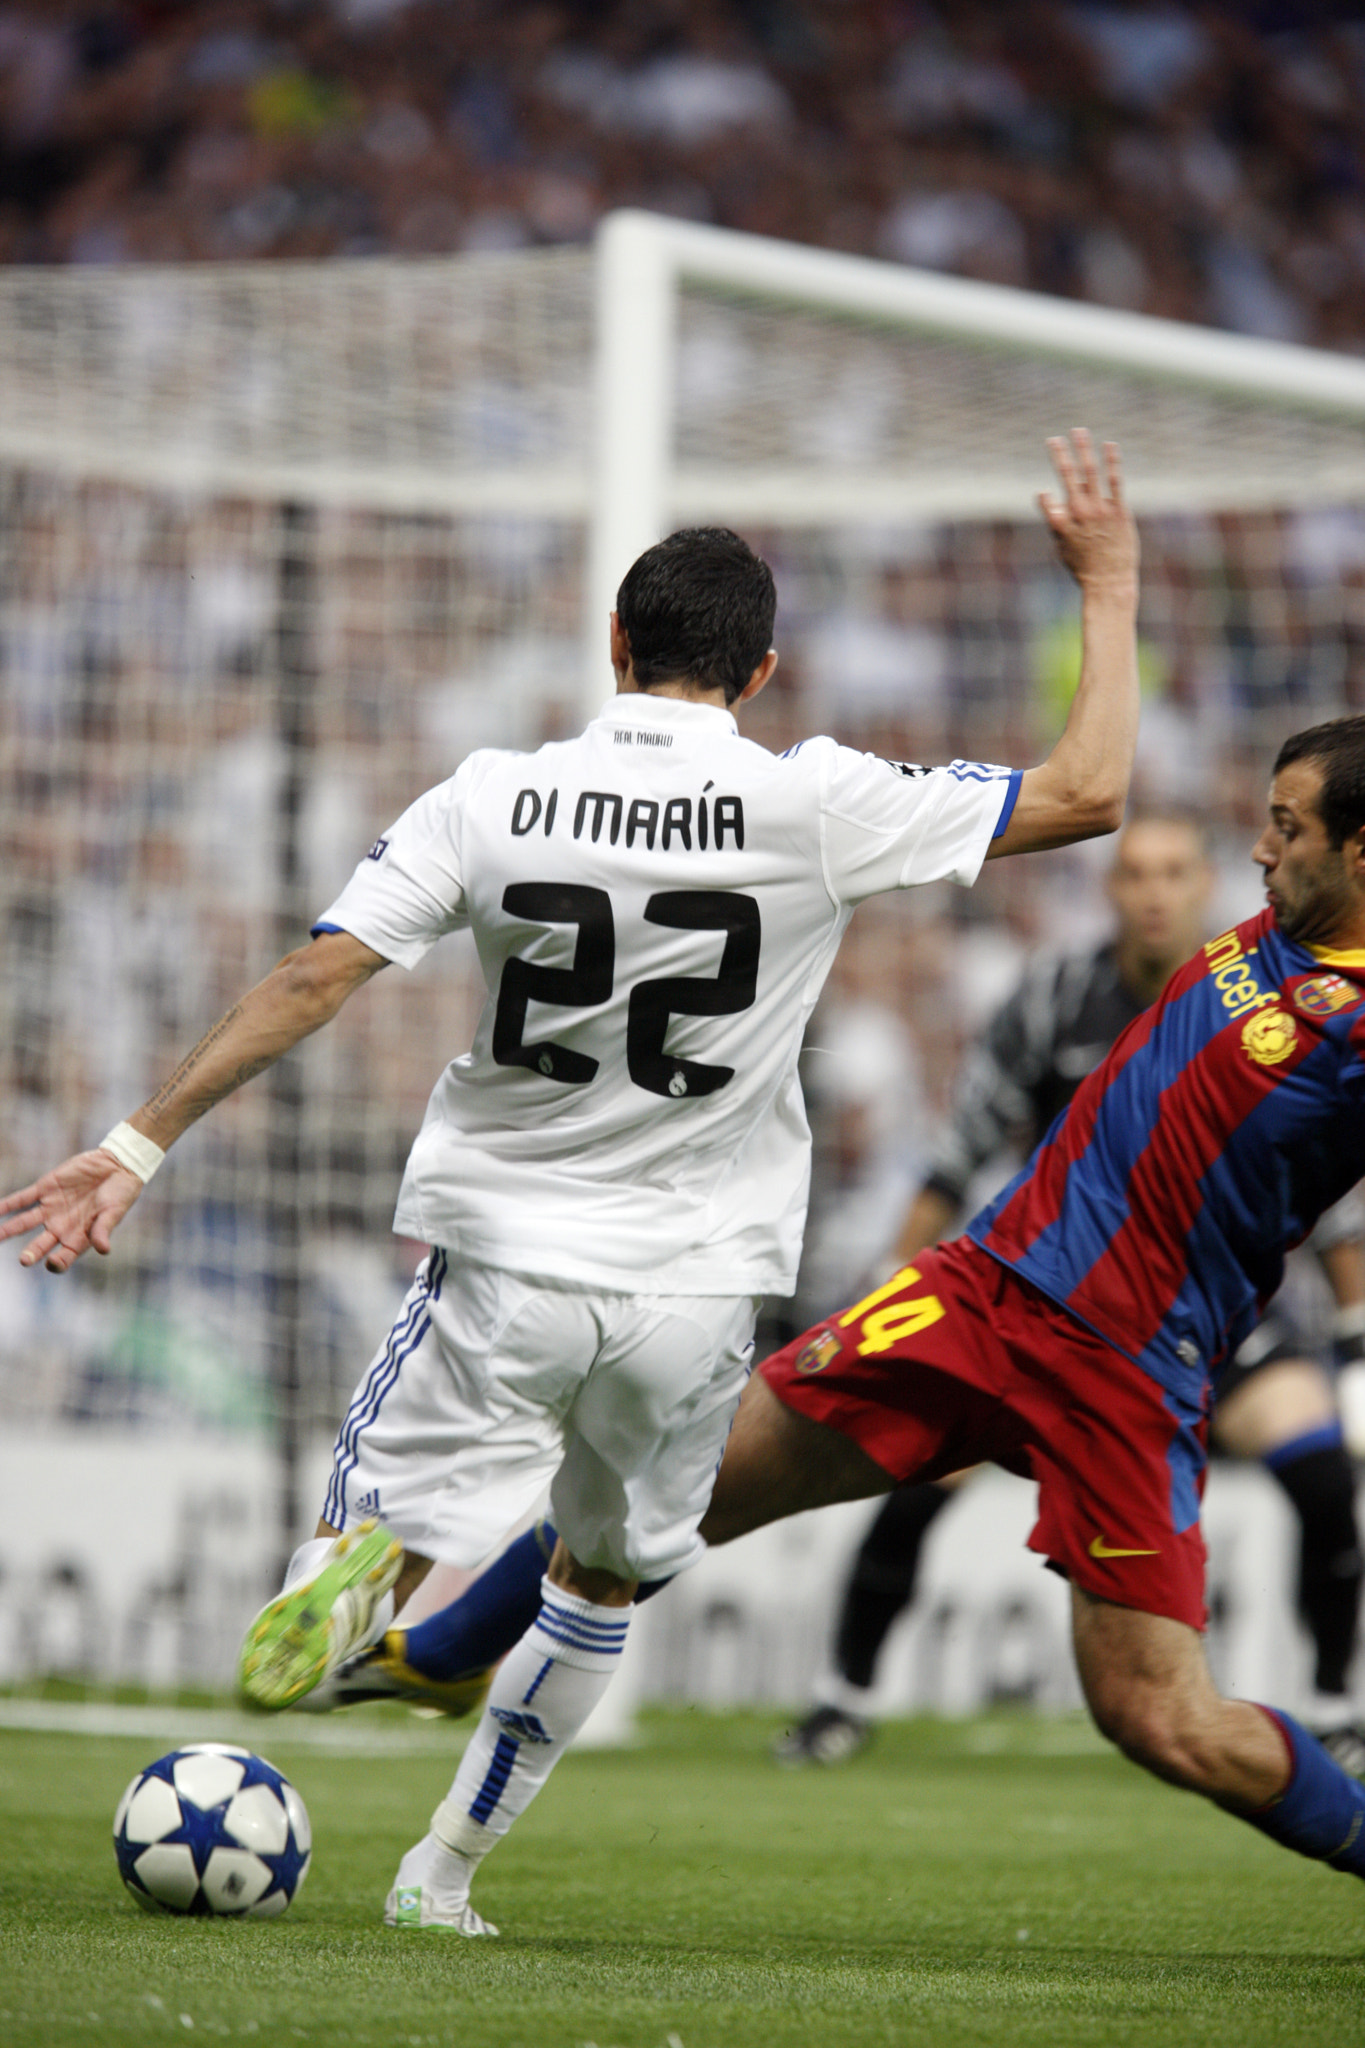 Di Maria about to center, UEFA Champions League Semifinals game between Real Madrid and FC Barcelona